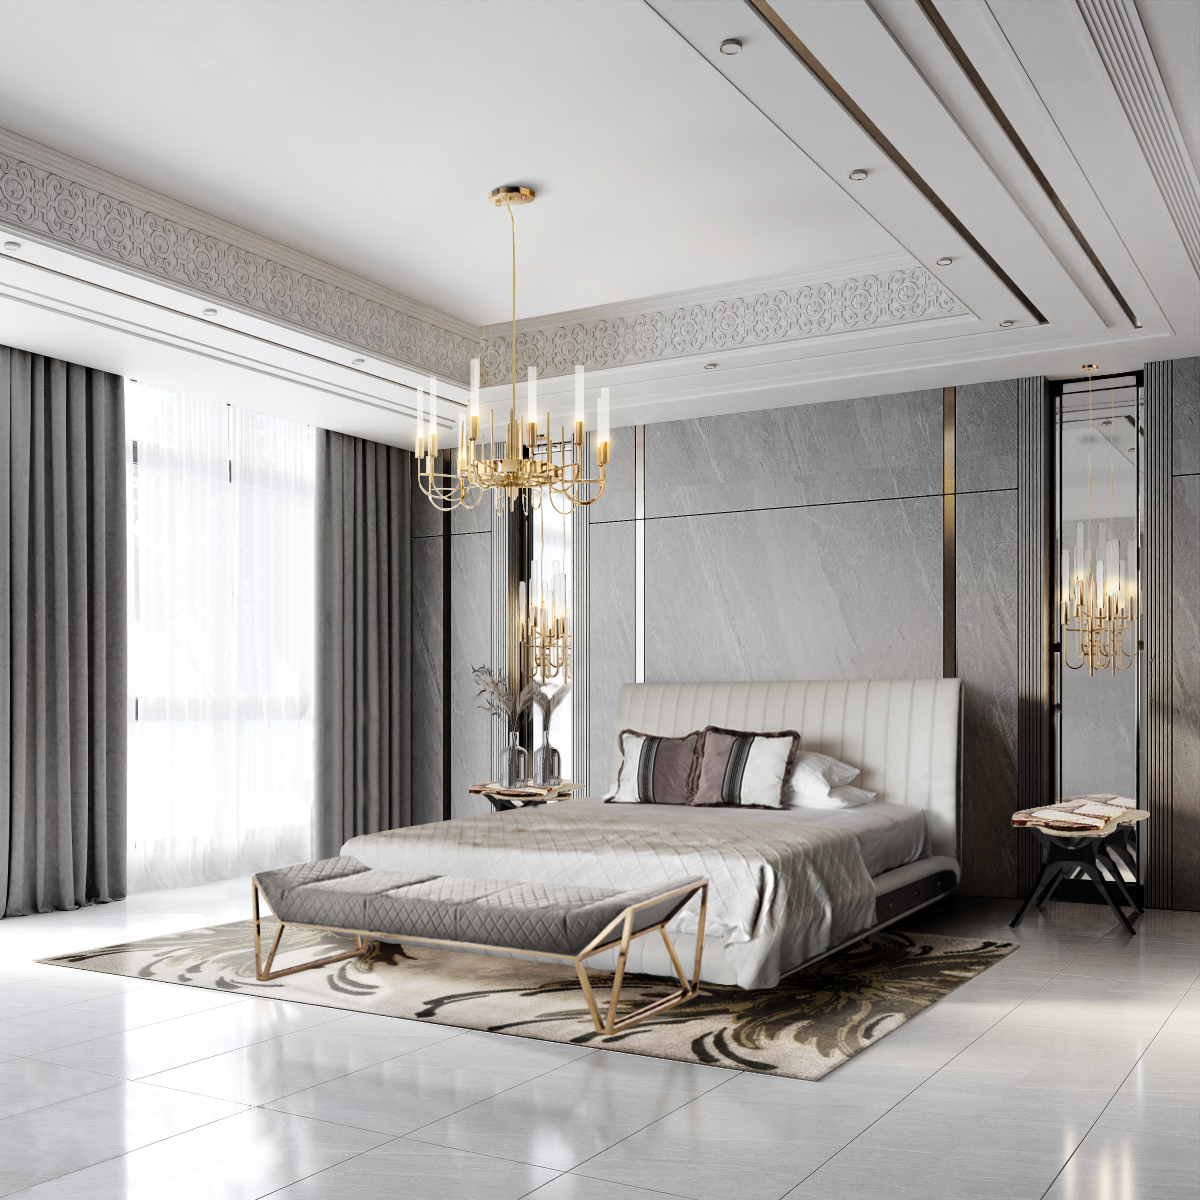 The luxury Bedroom with gold suspension